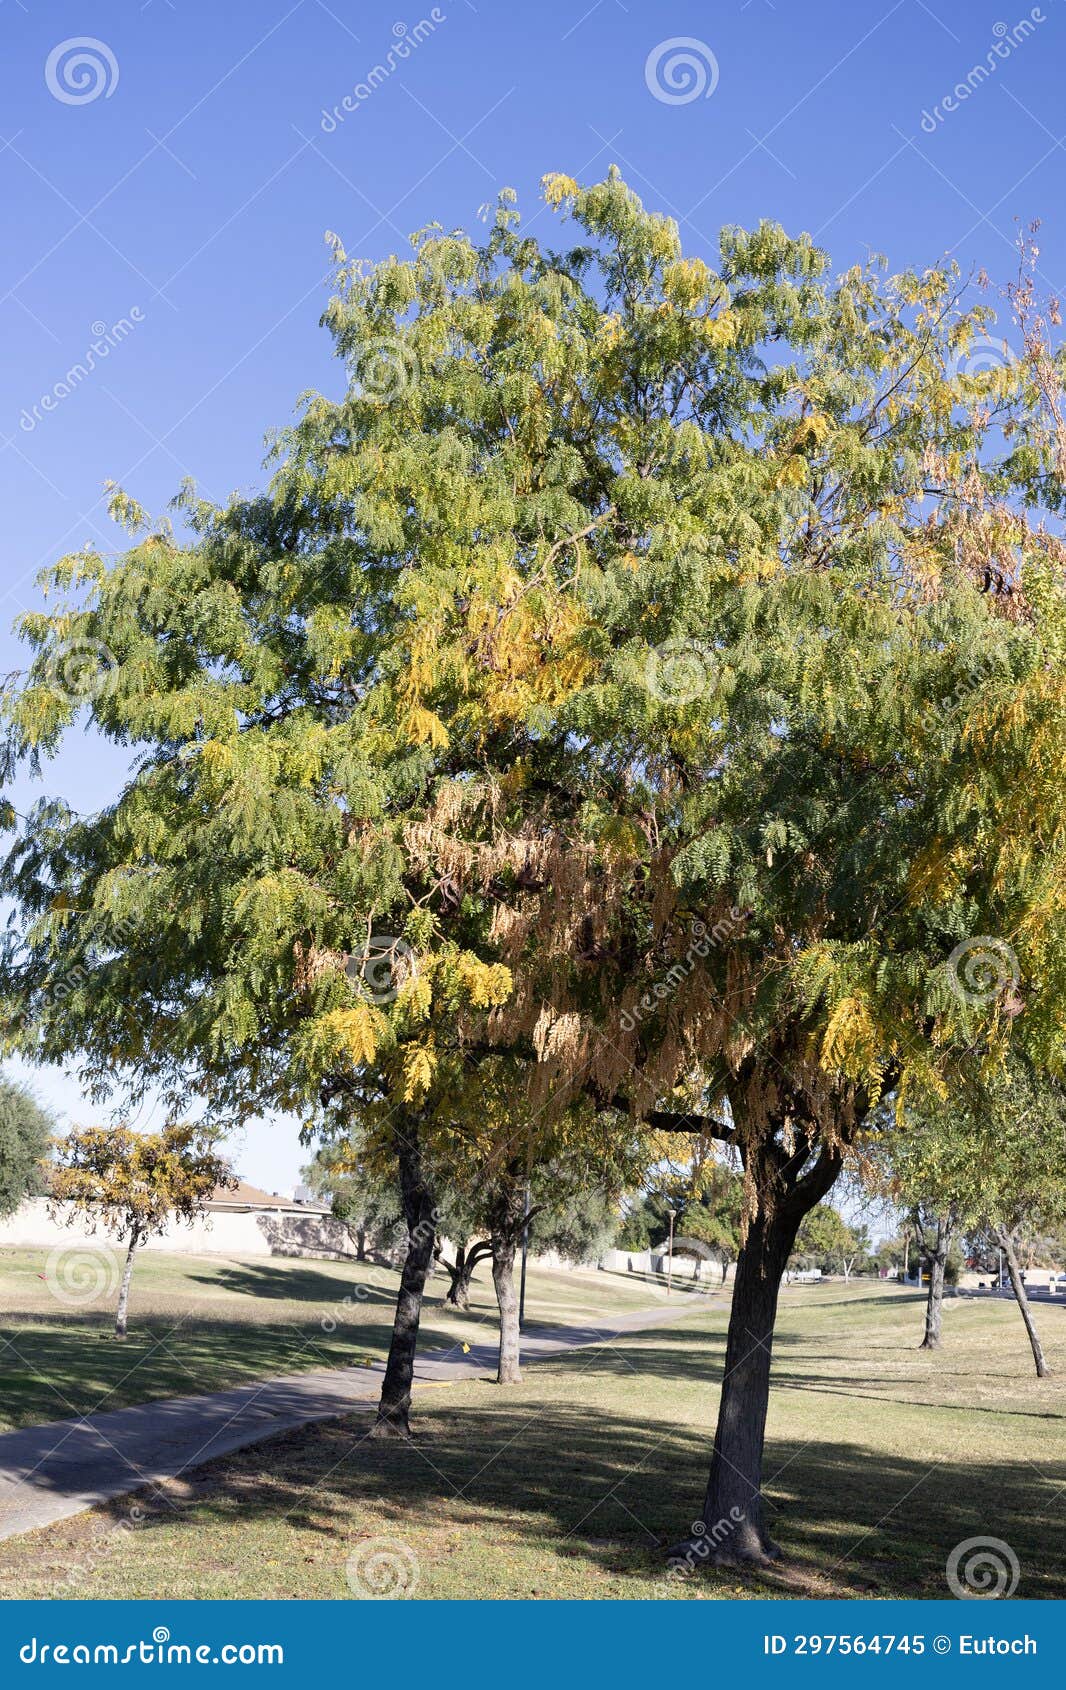 crown of honey locust tree also known as gleditsia triacanthos in autumn